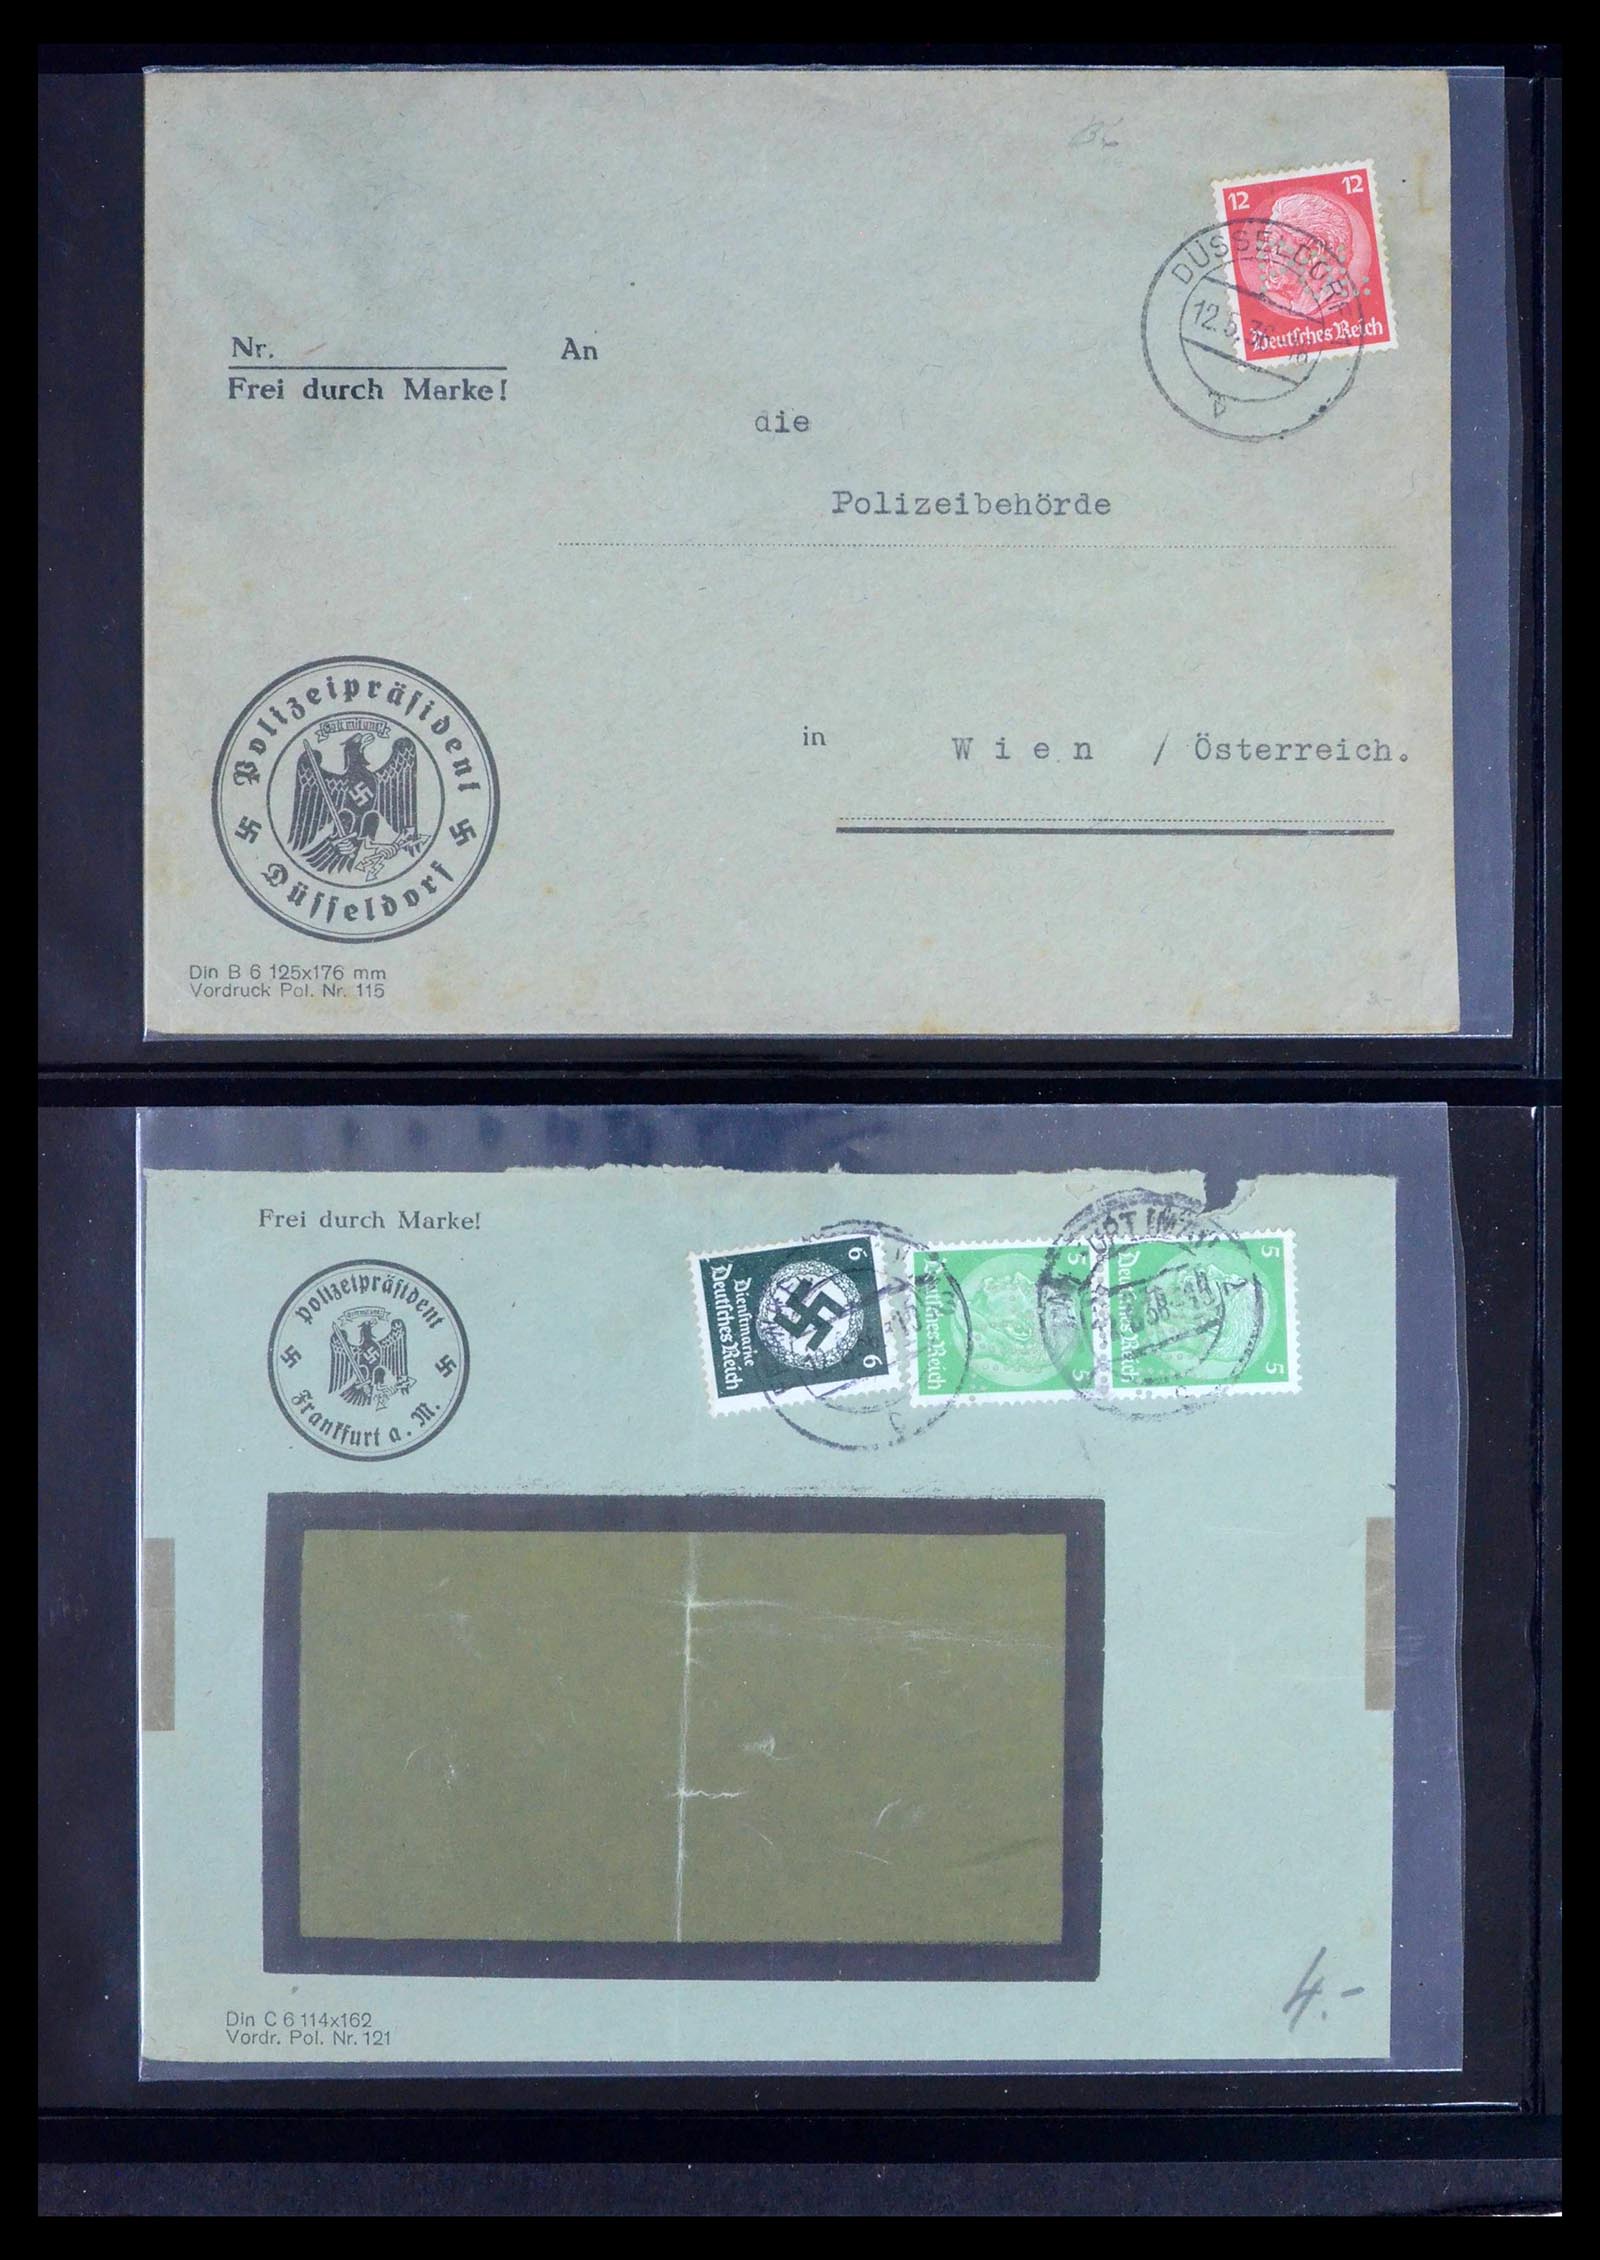 39458 0008 - Stamp collection 39458 Germany POL lochungen 1926-1955.